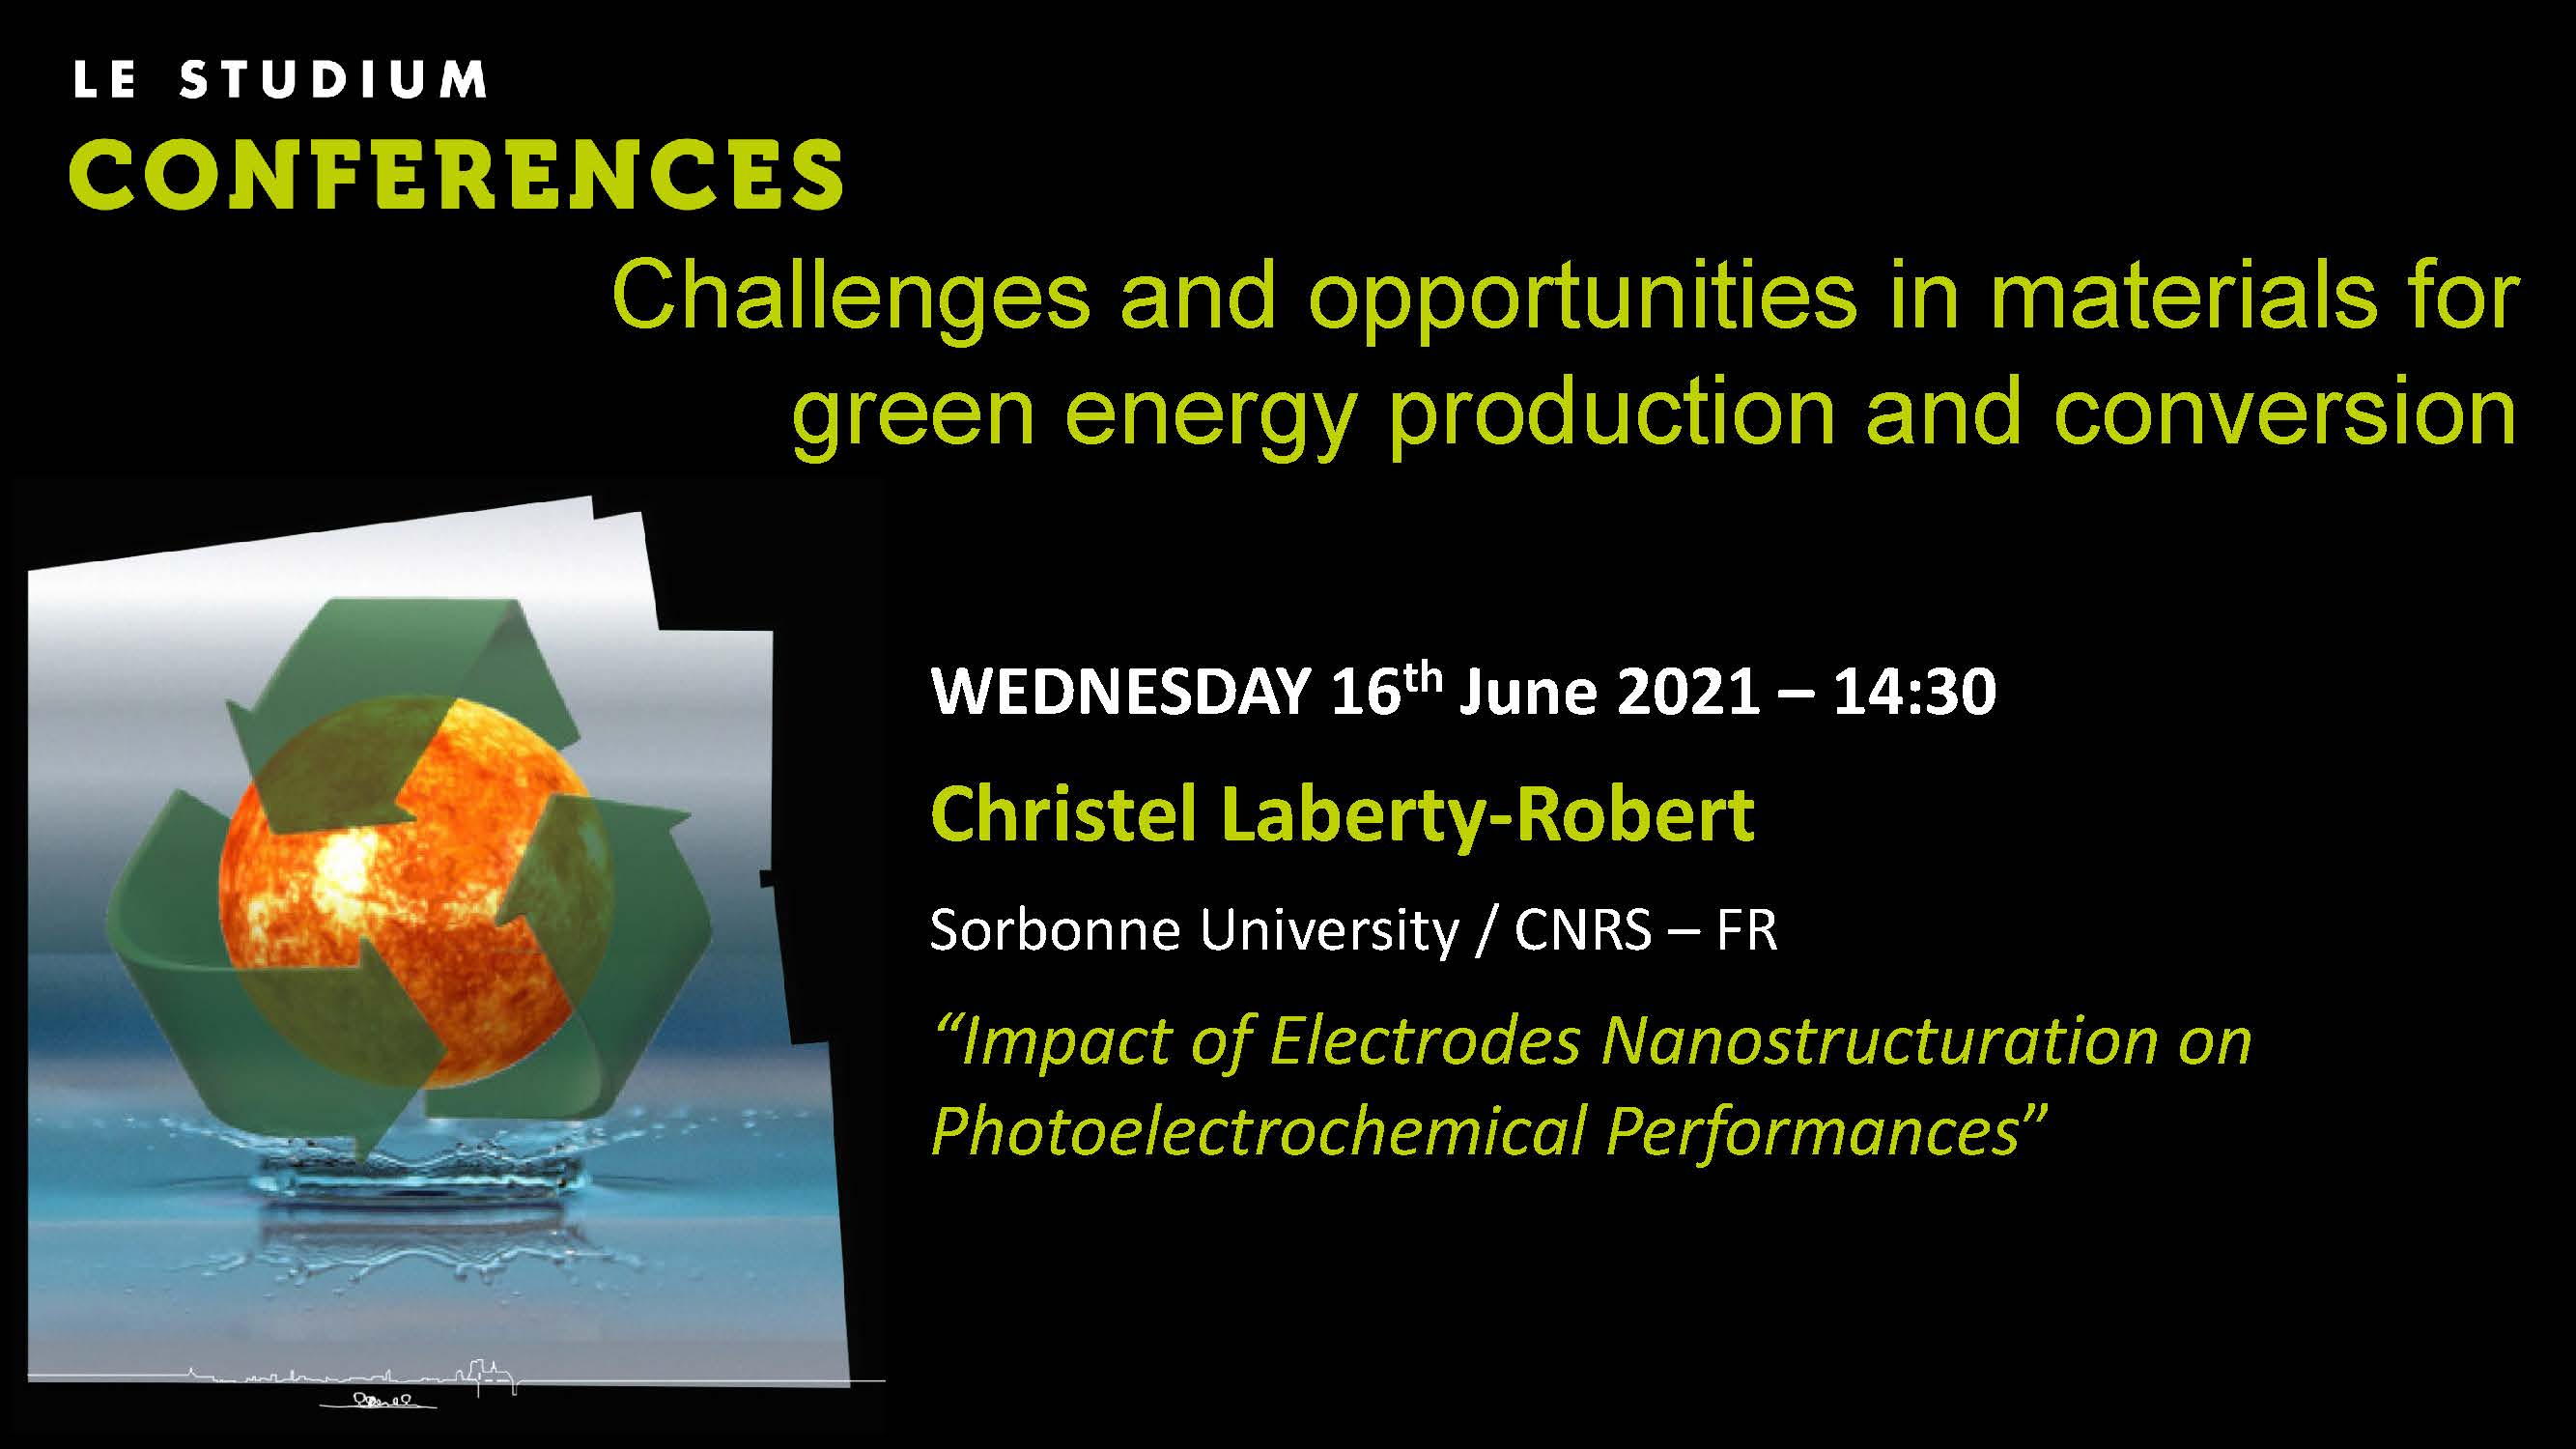 Christel Laberty-Robert - Impact of Electrodes Nanostructuration on Photoelectrochemical Performances